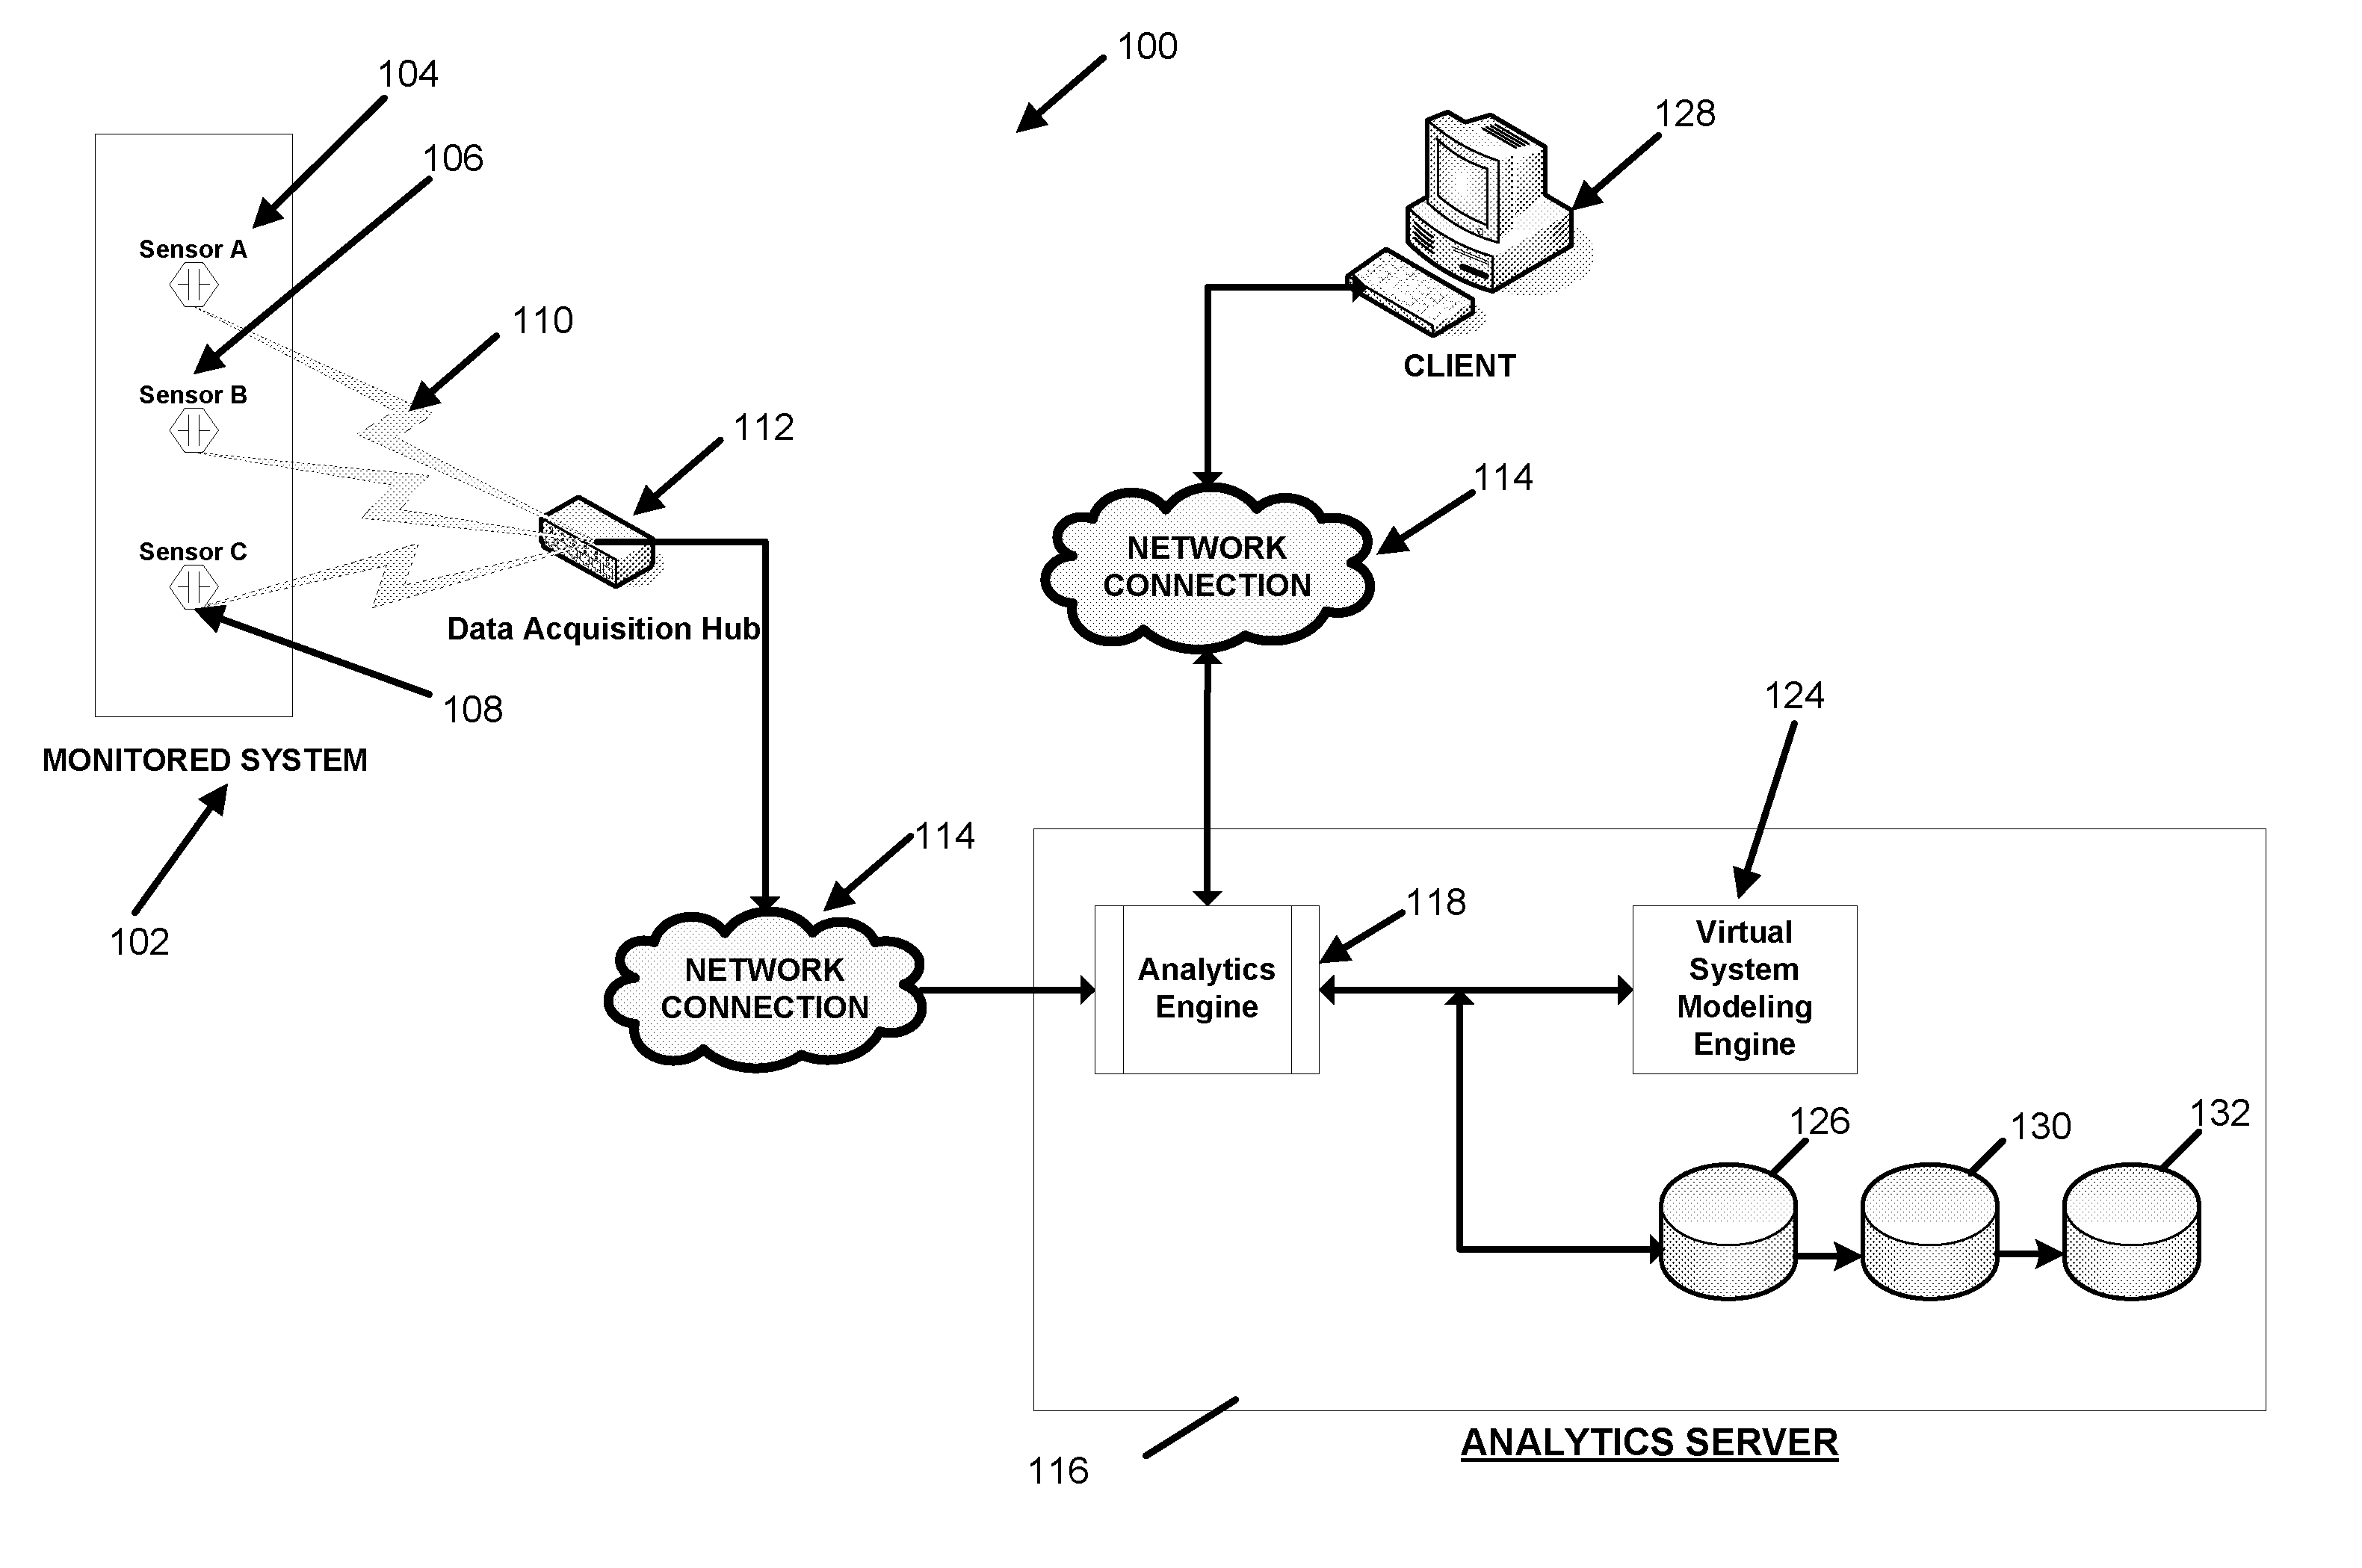 Systems and methods for determining protective device clearing times used for providing real-time predictions about arc flash events